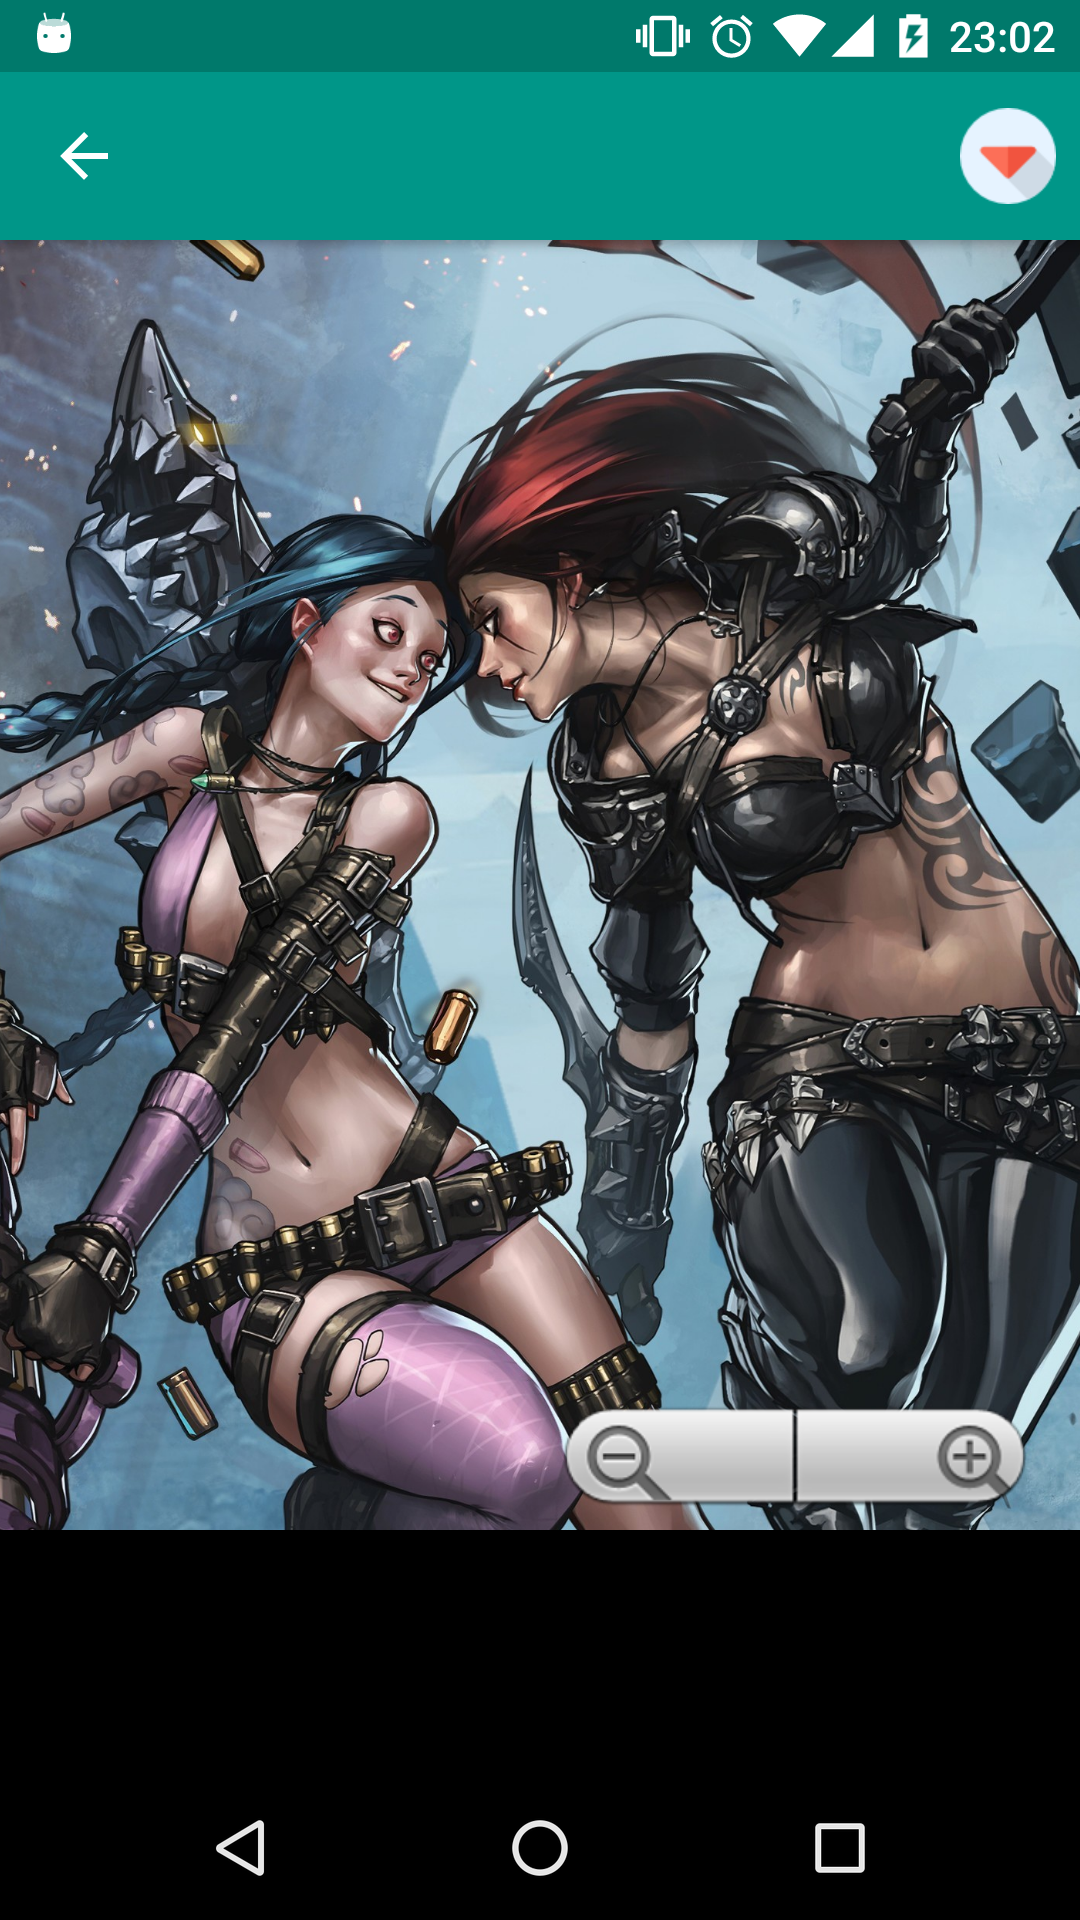 League of Legends wallpapers porn,phone,legends,erotica,picw,apps,backgrounds,game,download,lily,sexy,puzzle,top,hot,lane,adult,wallpaper,app,wallpapers,pictures,for,pics,apk,henti,league,hentai